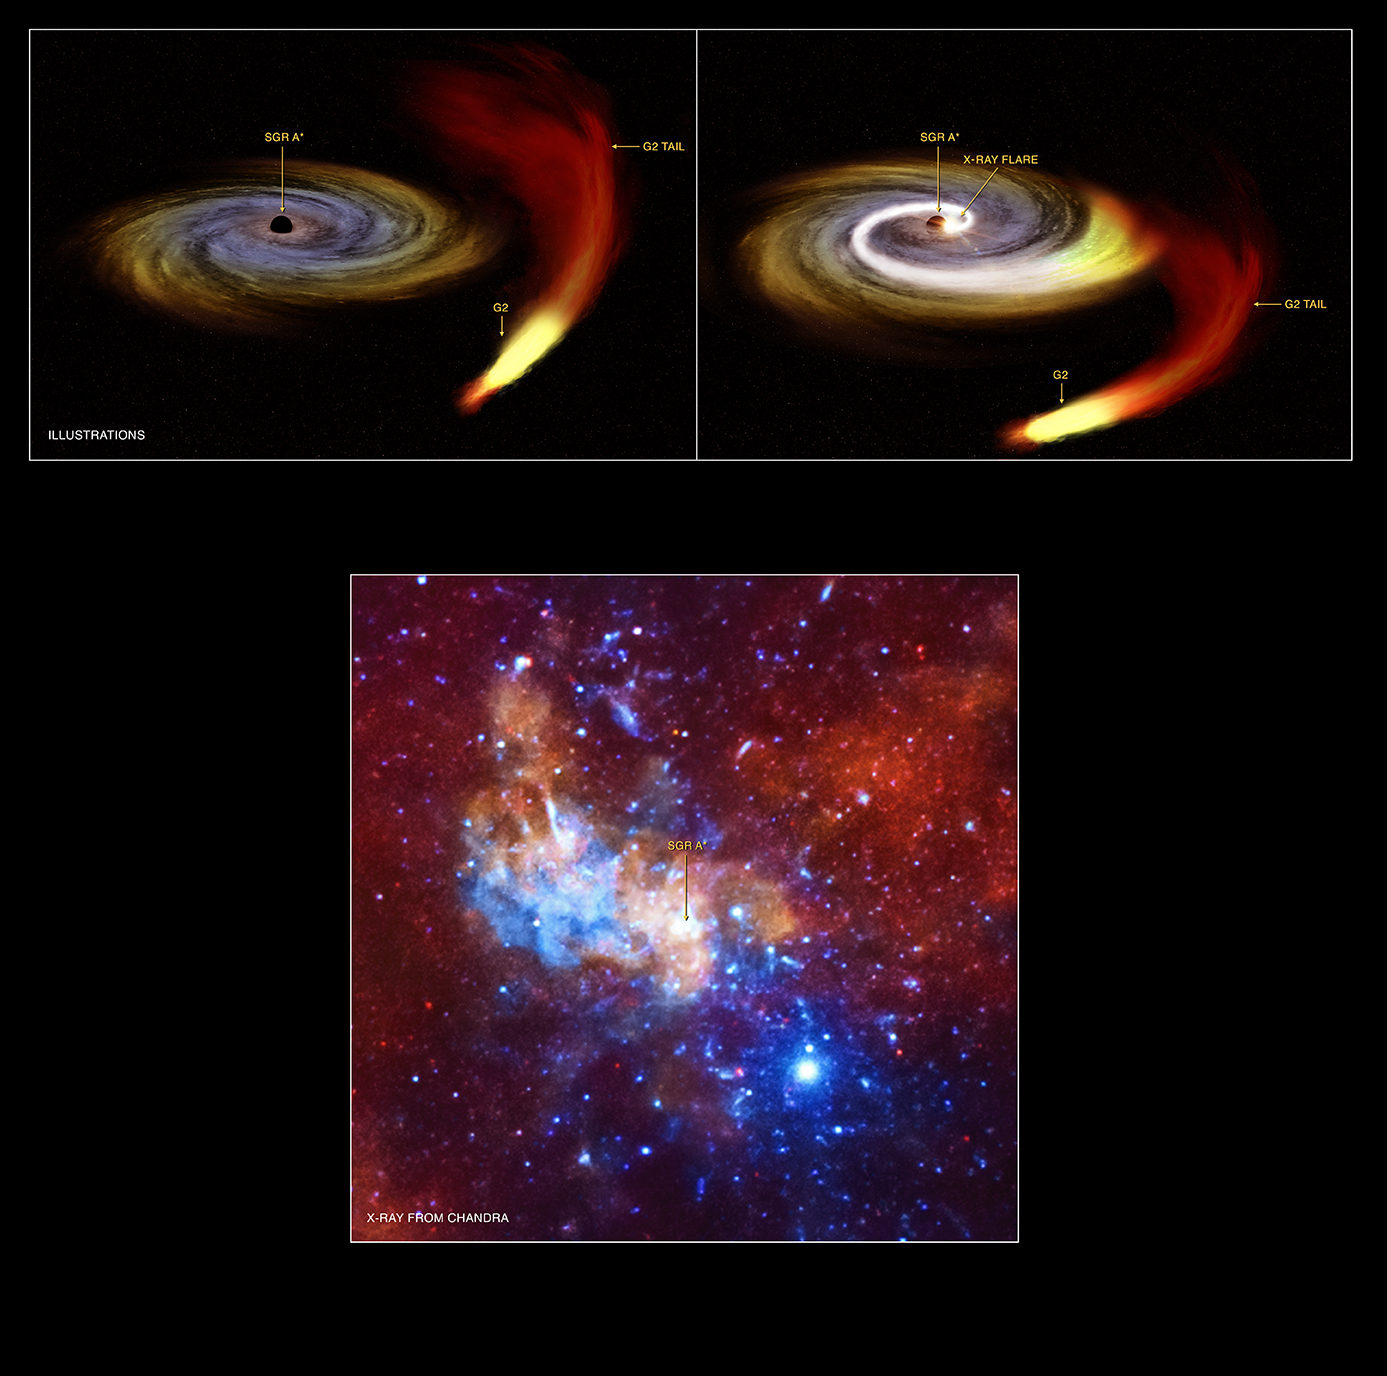 The 4-million-solar-mass black hole at the center of the Milky Way.